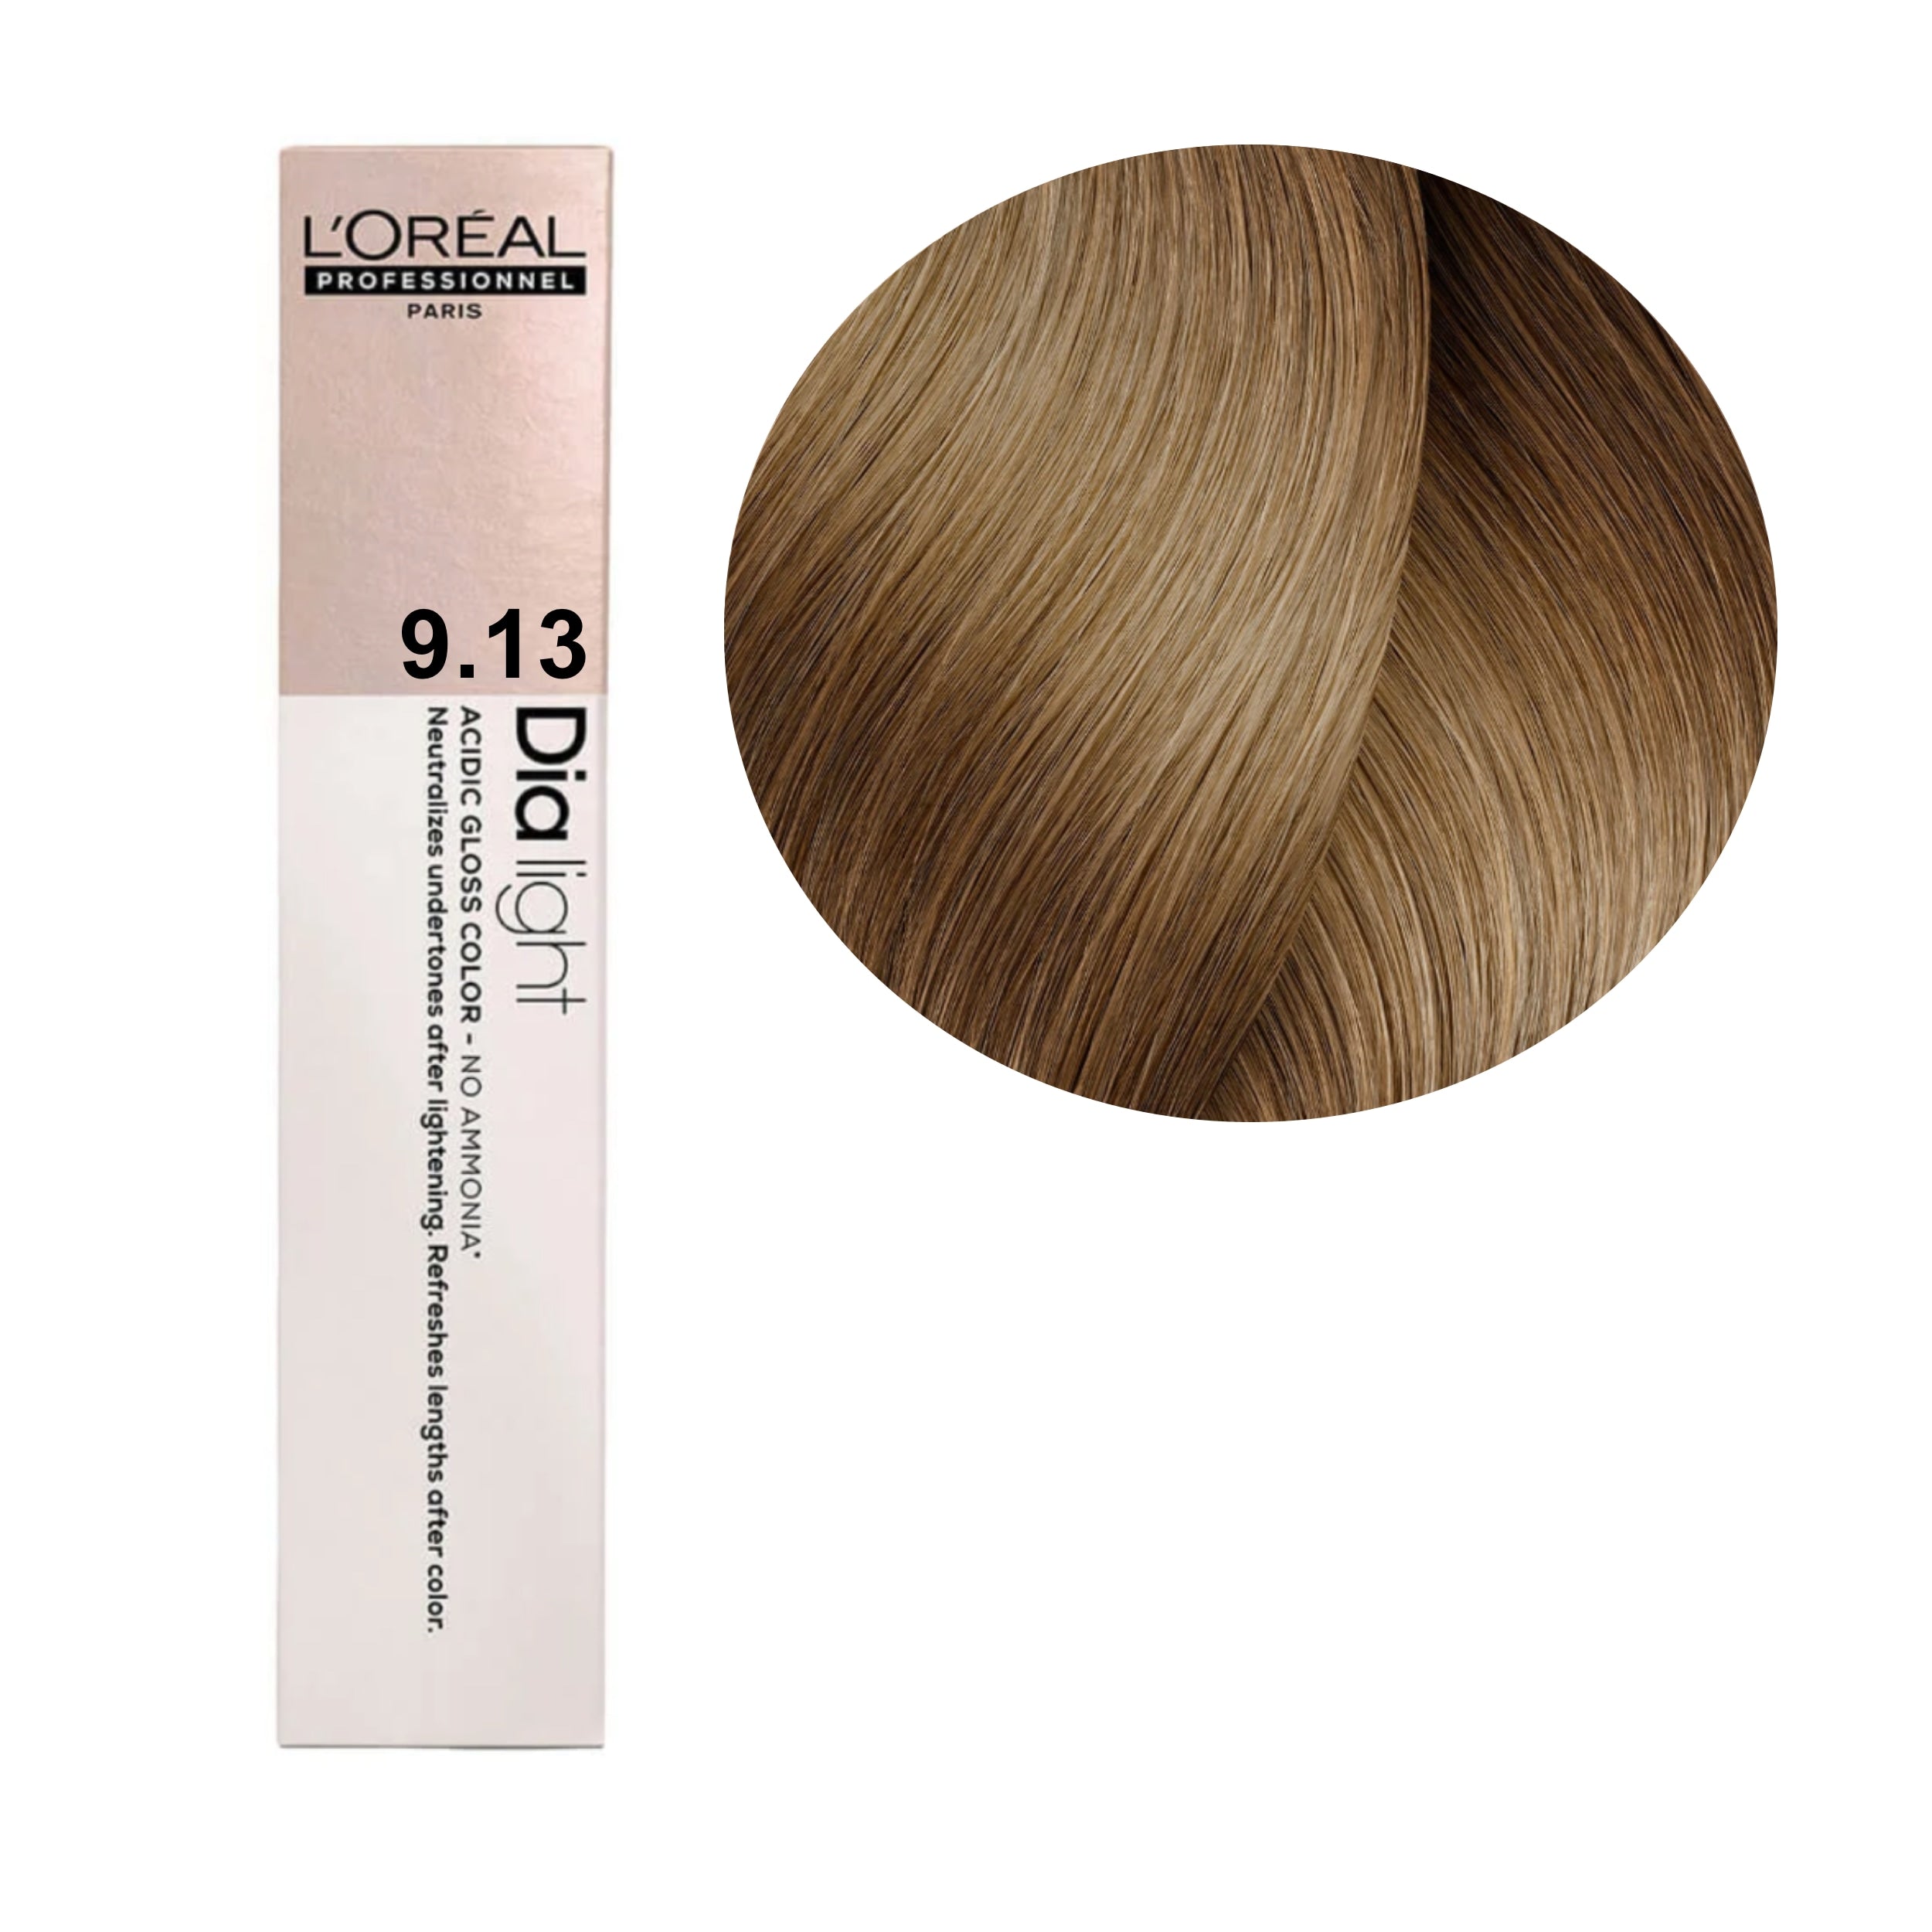 a box of loreal hair color in light blonde